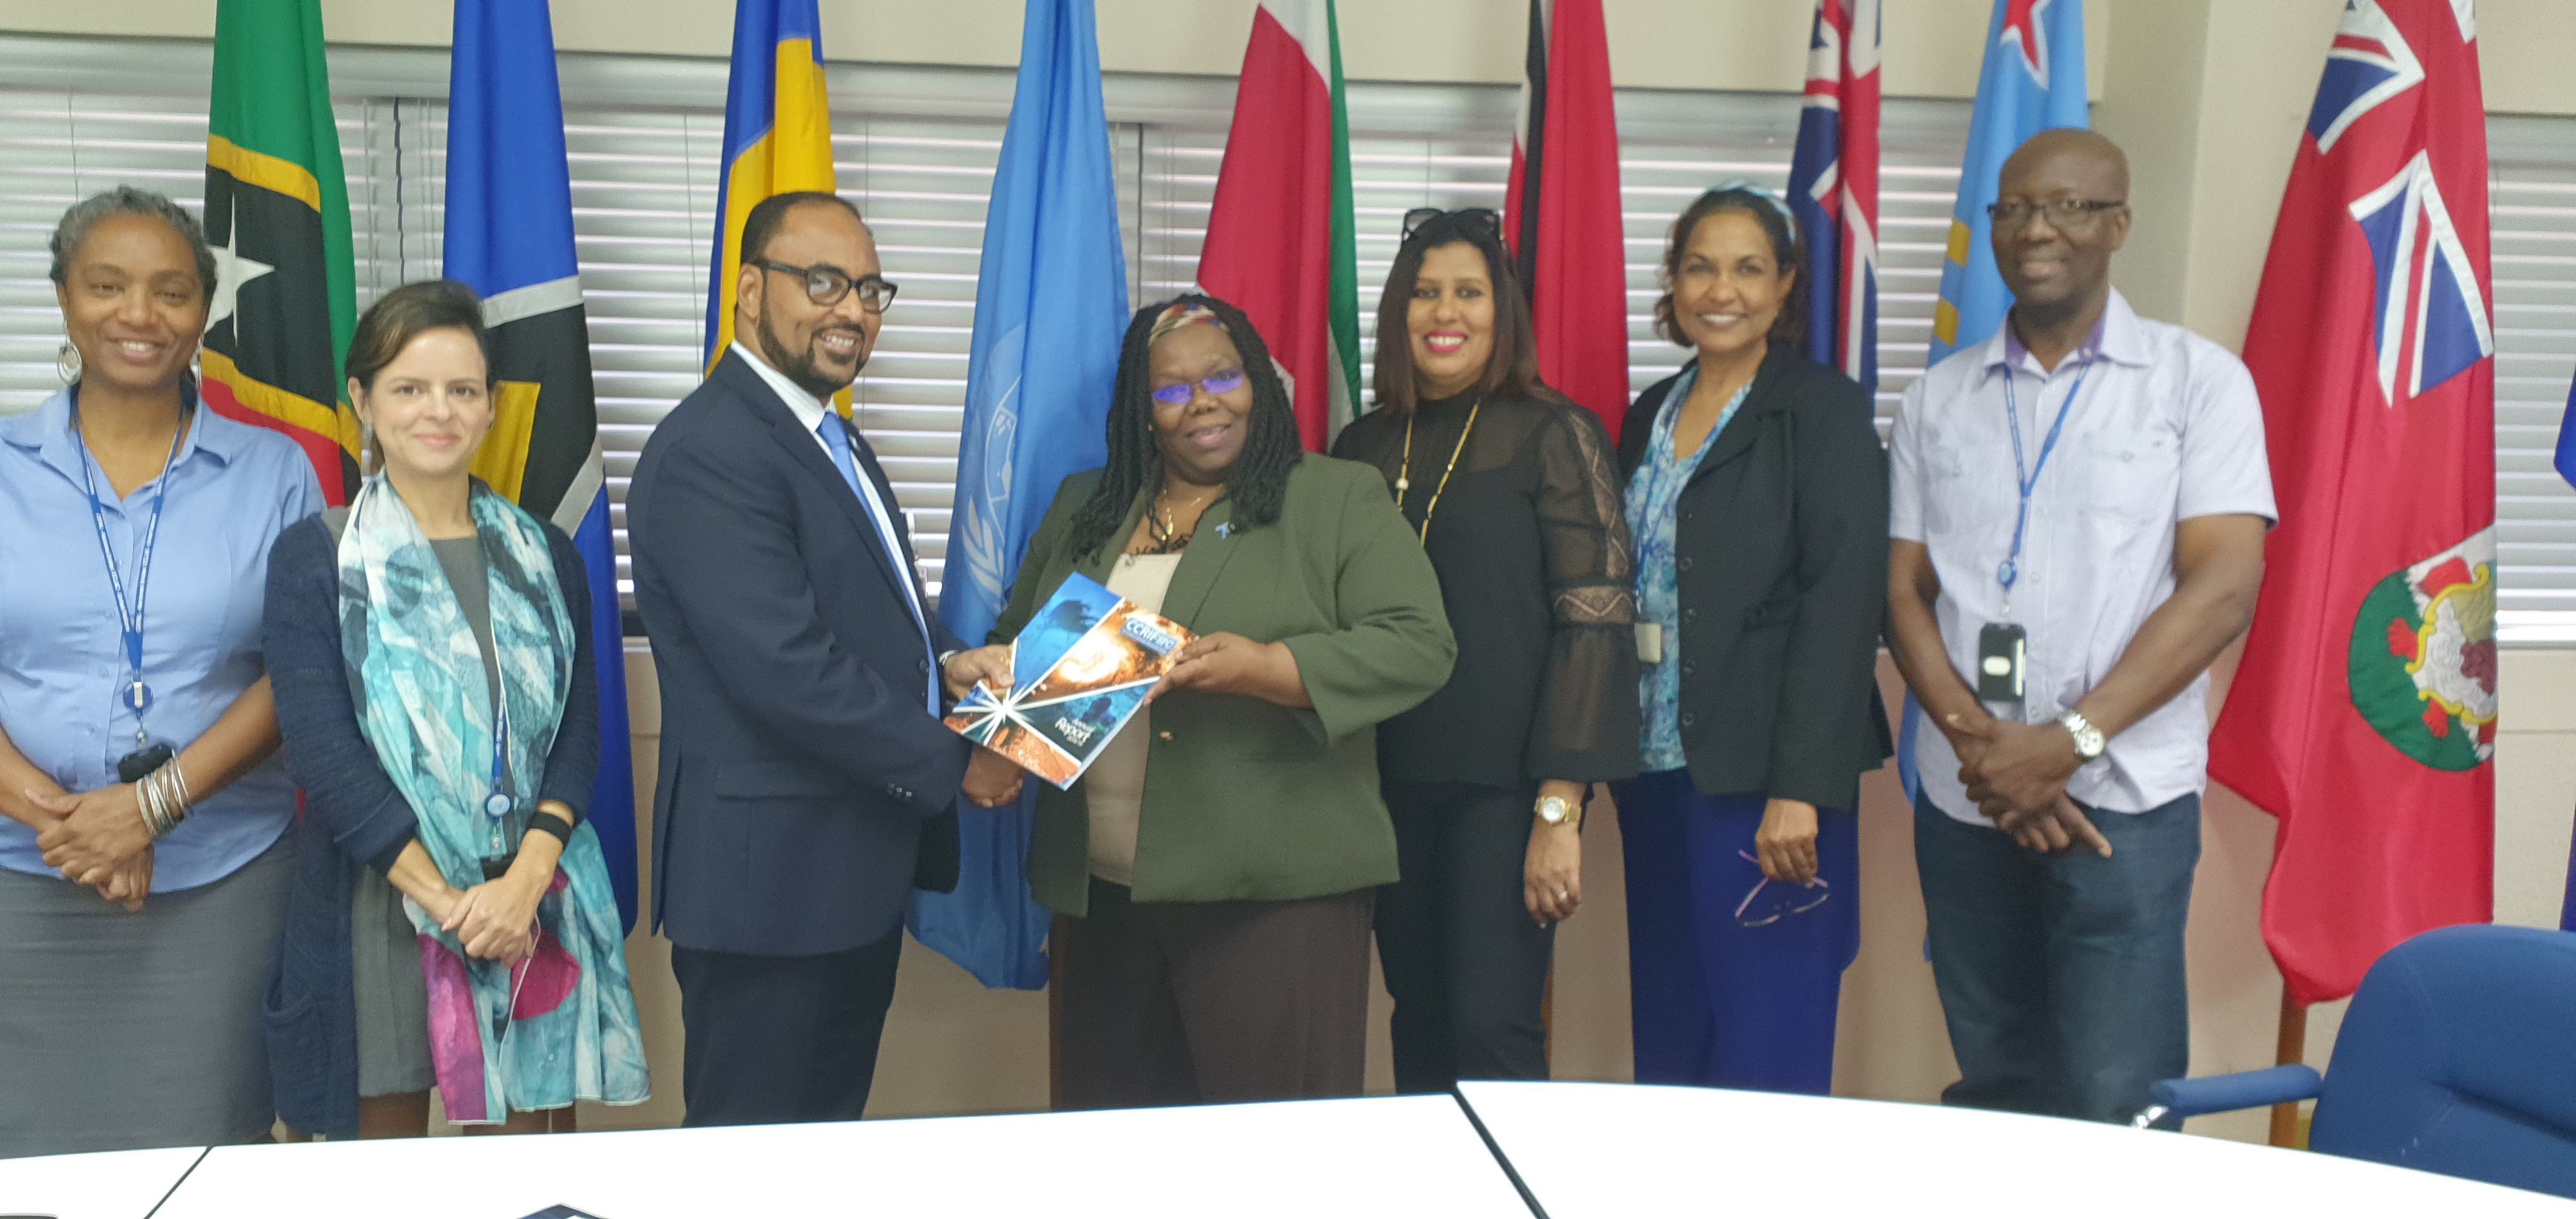 Courtesy Call with UNECLAC, Port-of-Spain 2020